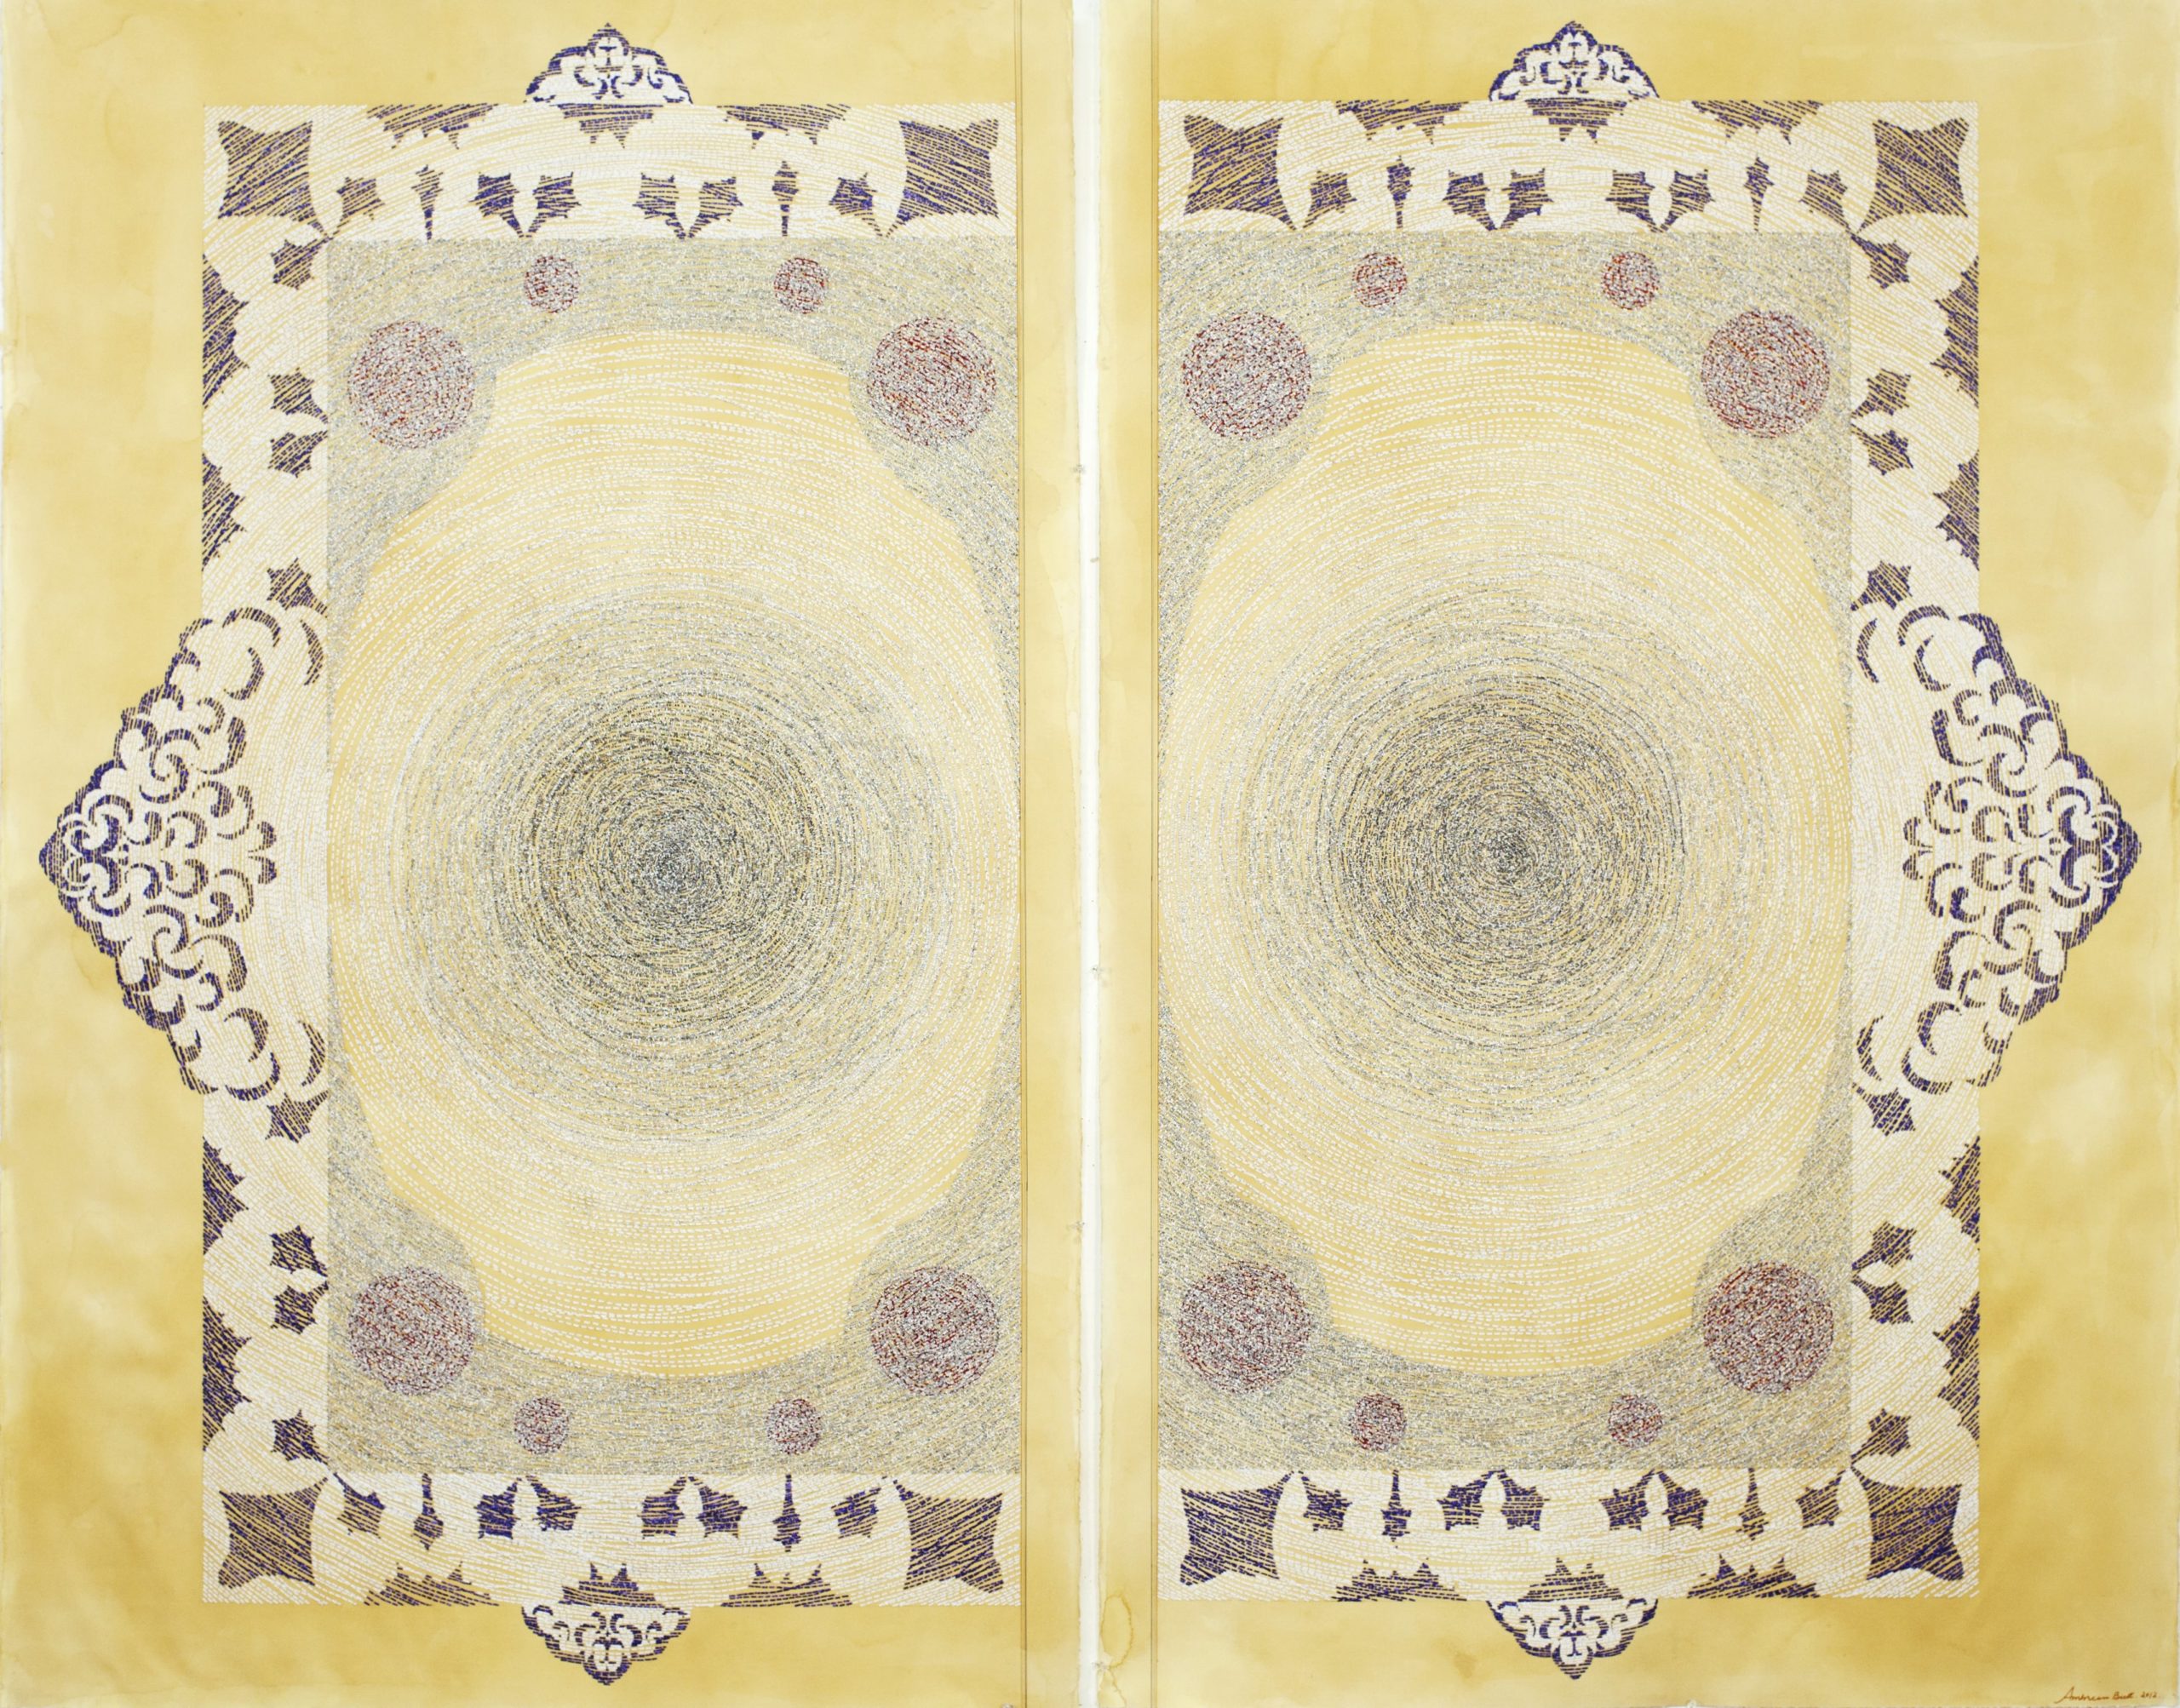 Diptych drawing of a page with arabesque scrolls and concentric circles.